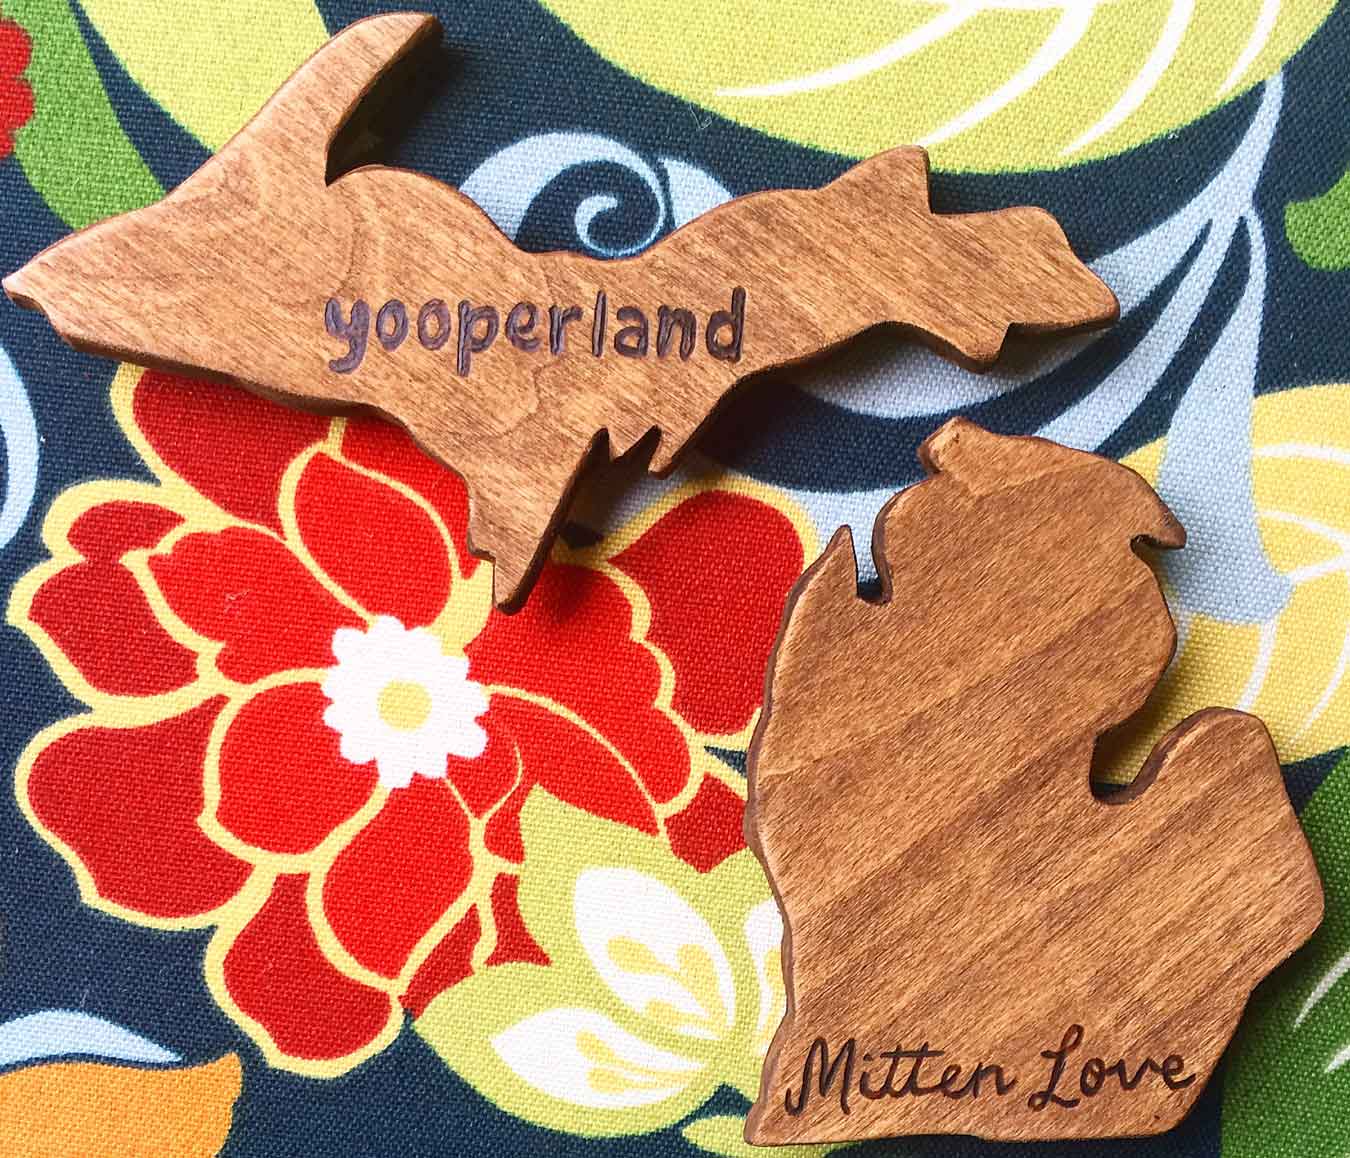  Michigan Gift Idea: Handmade Home Decor From Wood By Al // Featured: Handcrafted, wood Michigan magnets (upper peninsula and mitten).(via Wading in Big Shoes)